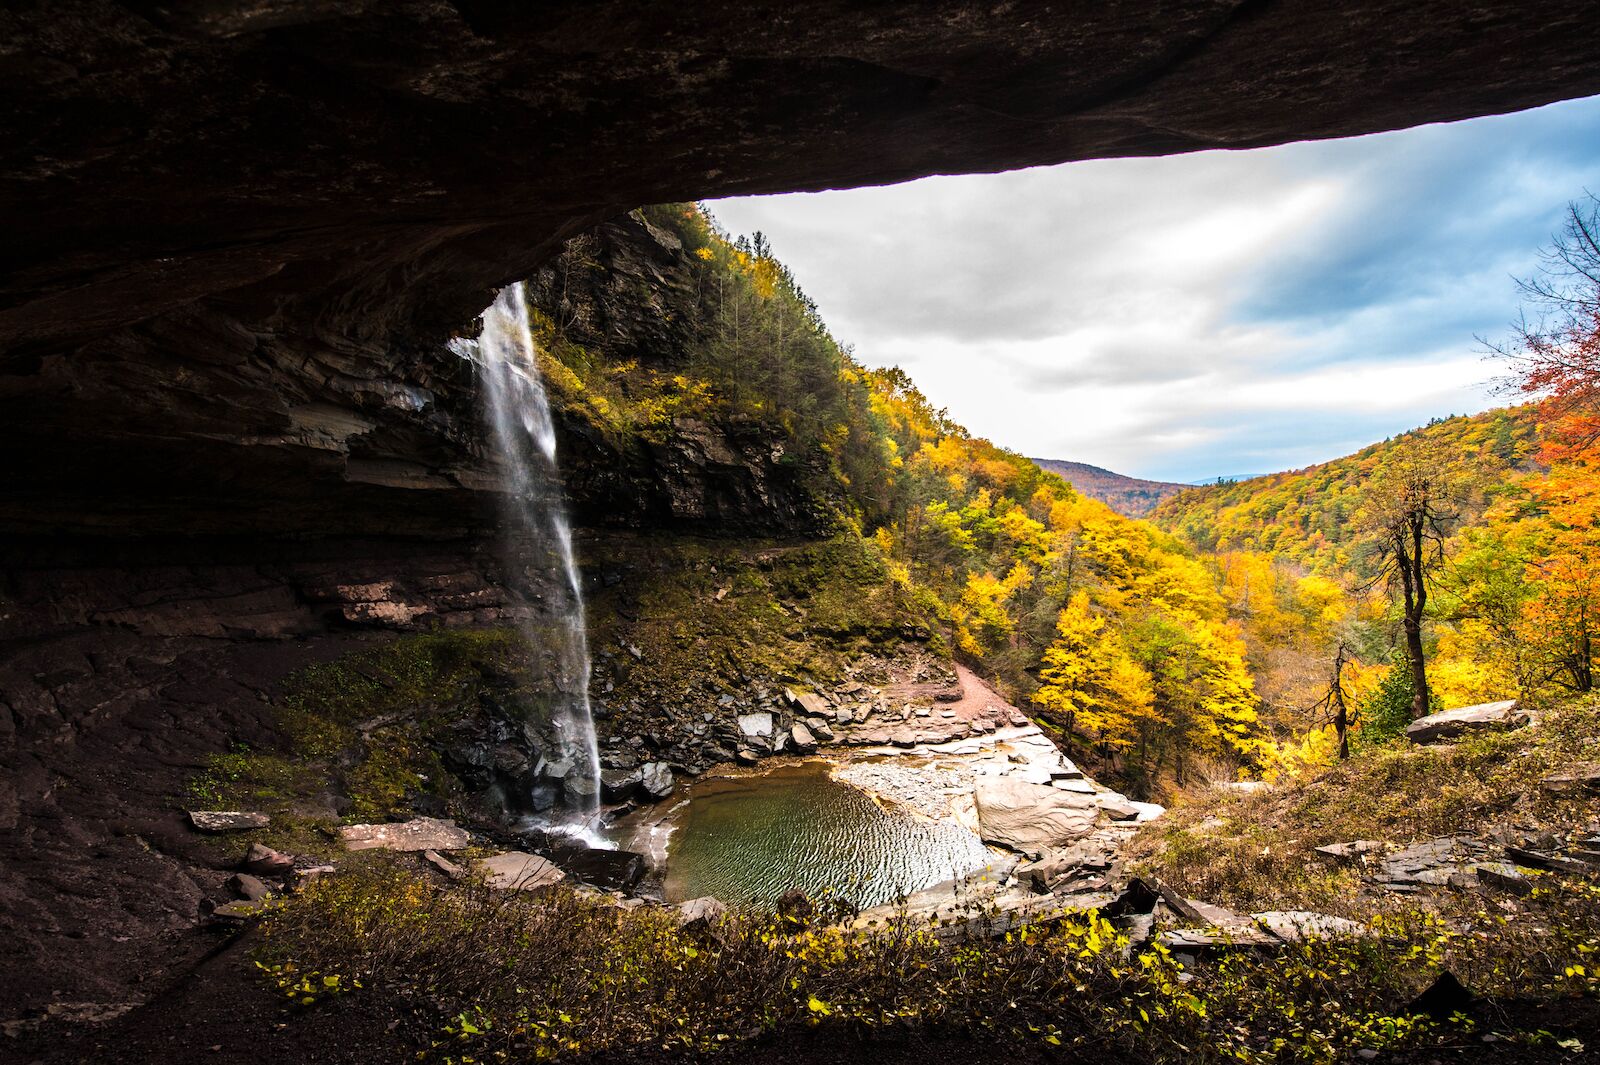 Kaaterskill falls waterfall in the New York Catskill mountains one of the best places for bachelorette party